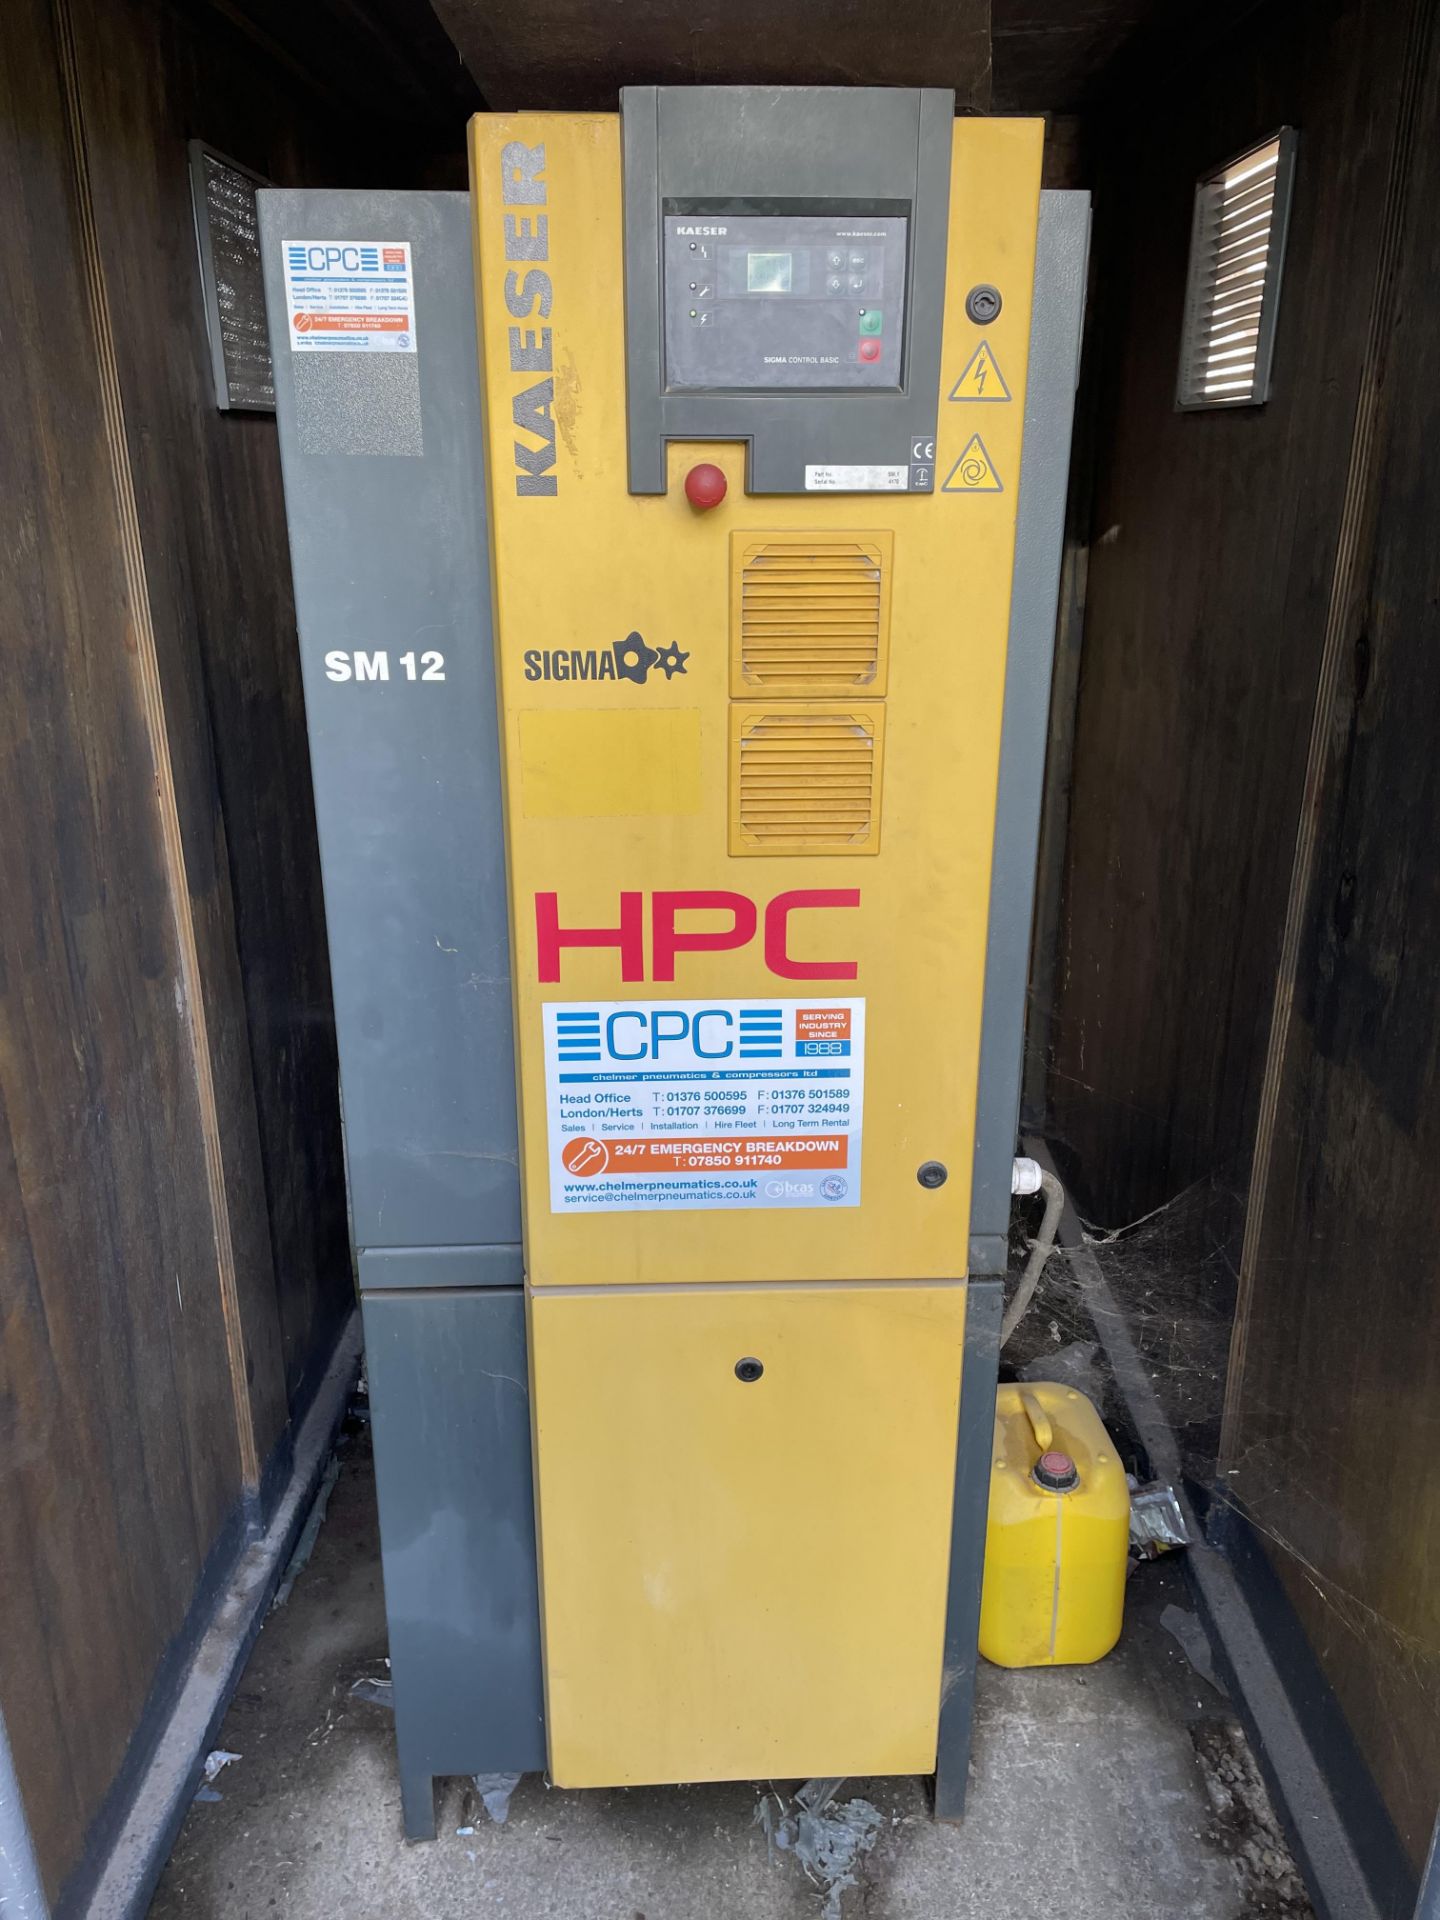 Kaeser Sigma SM 12 HPC Variable Speed Rotary Screw Air Compressor S/No. 4170, Run Hours: 45,192 - Image 2 of 7